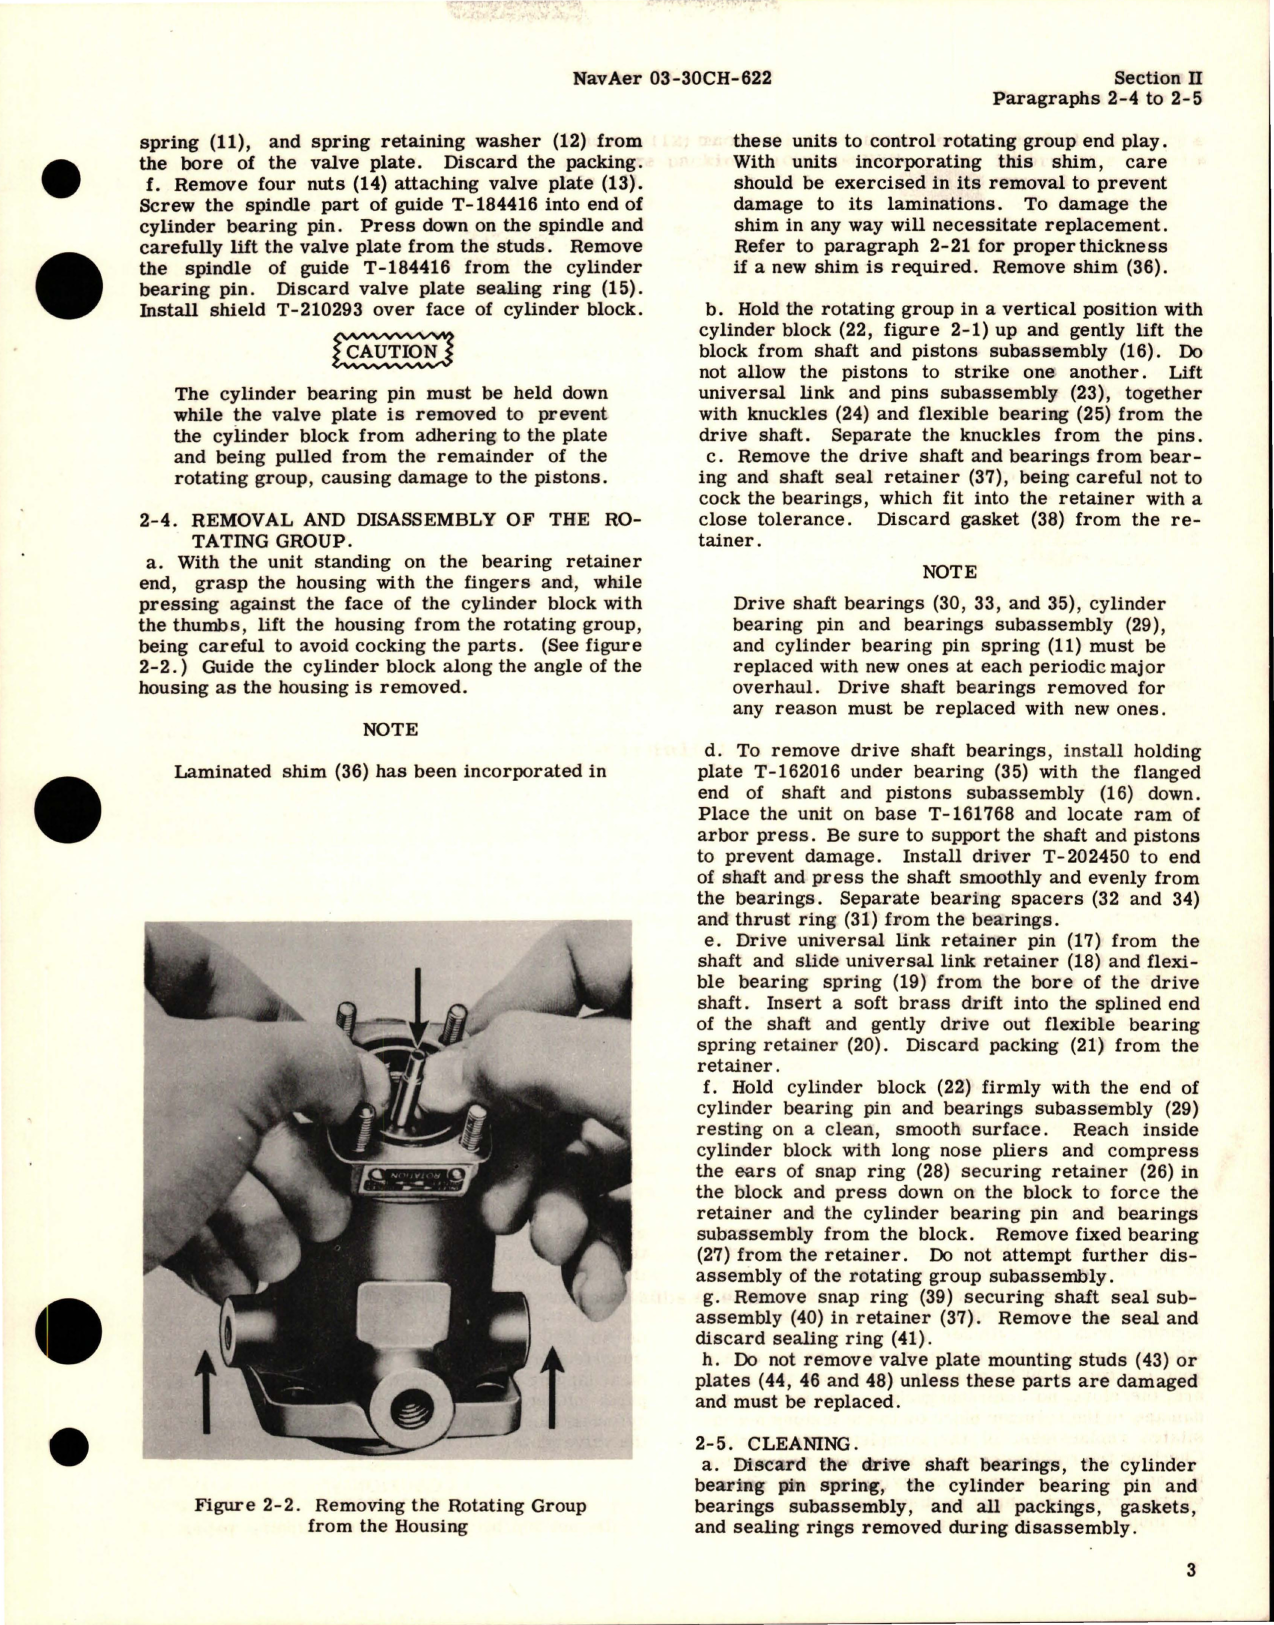 Sample page 7 from AirCorps Library document: Overhaul Instructions for Constant Displacement Hydraulic Motor Assembly - MF-3906-5 Series